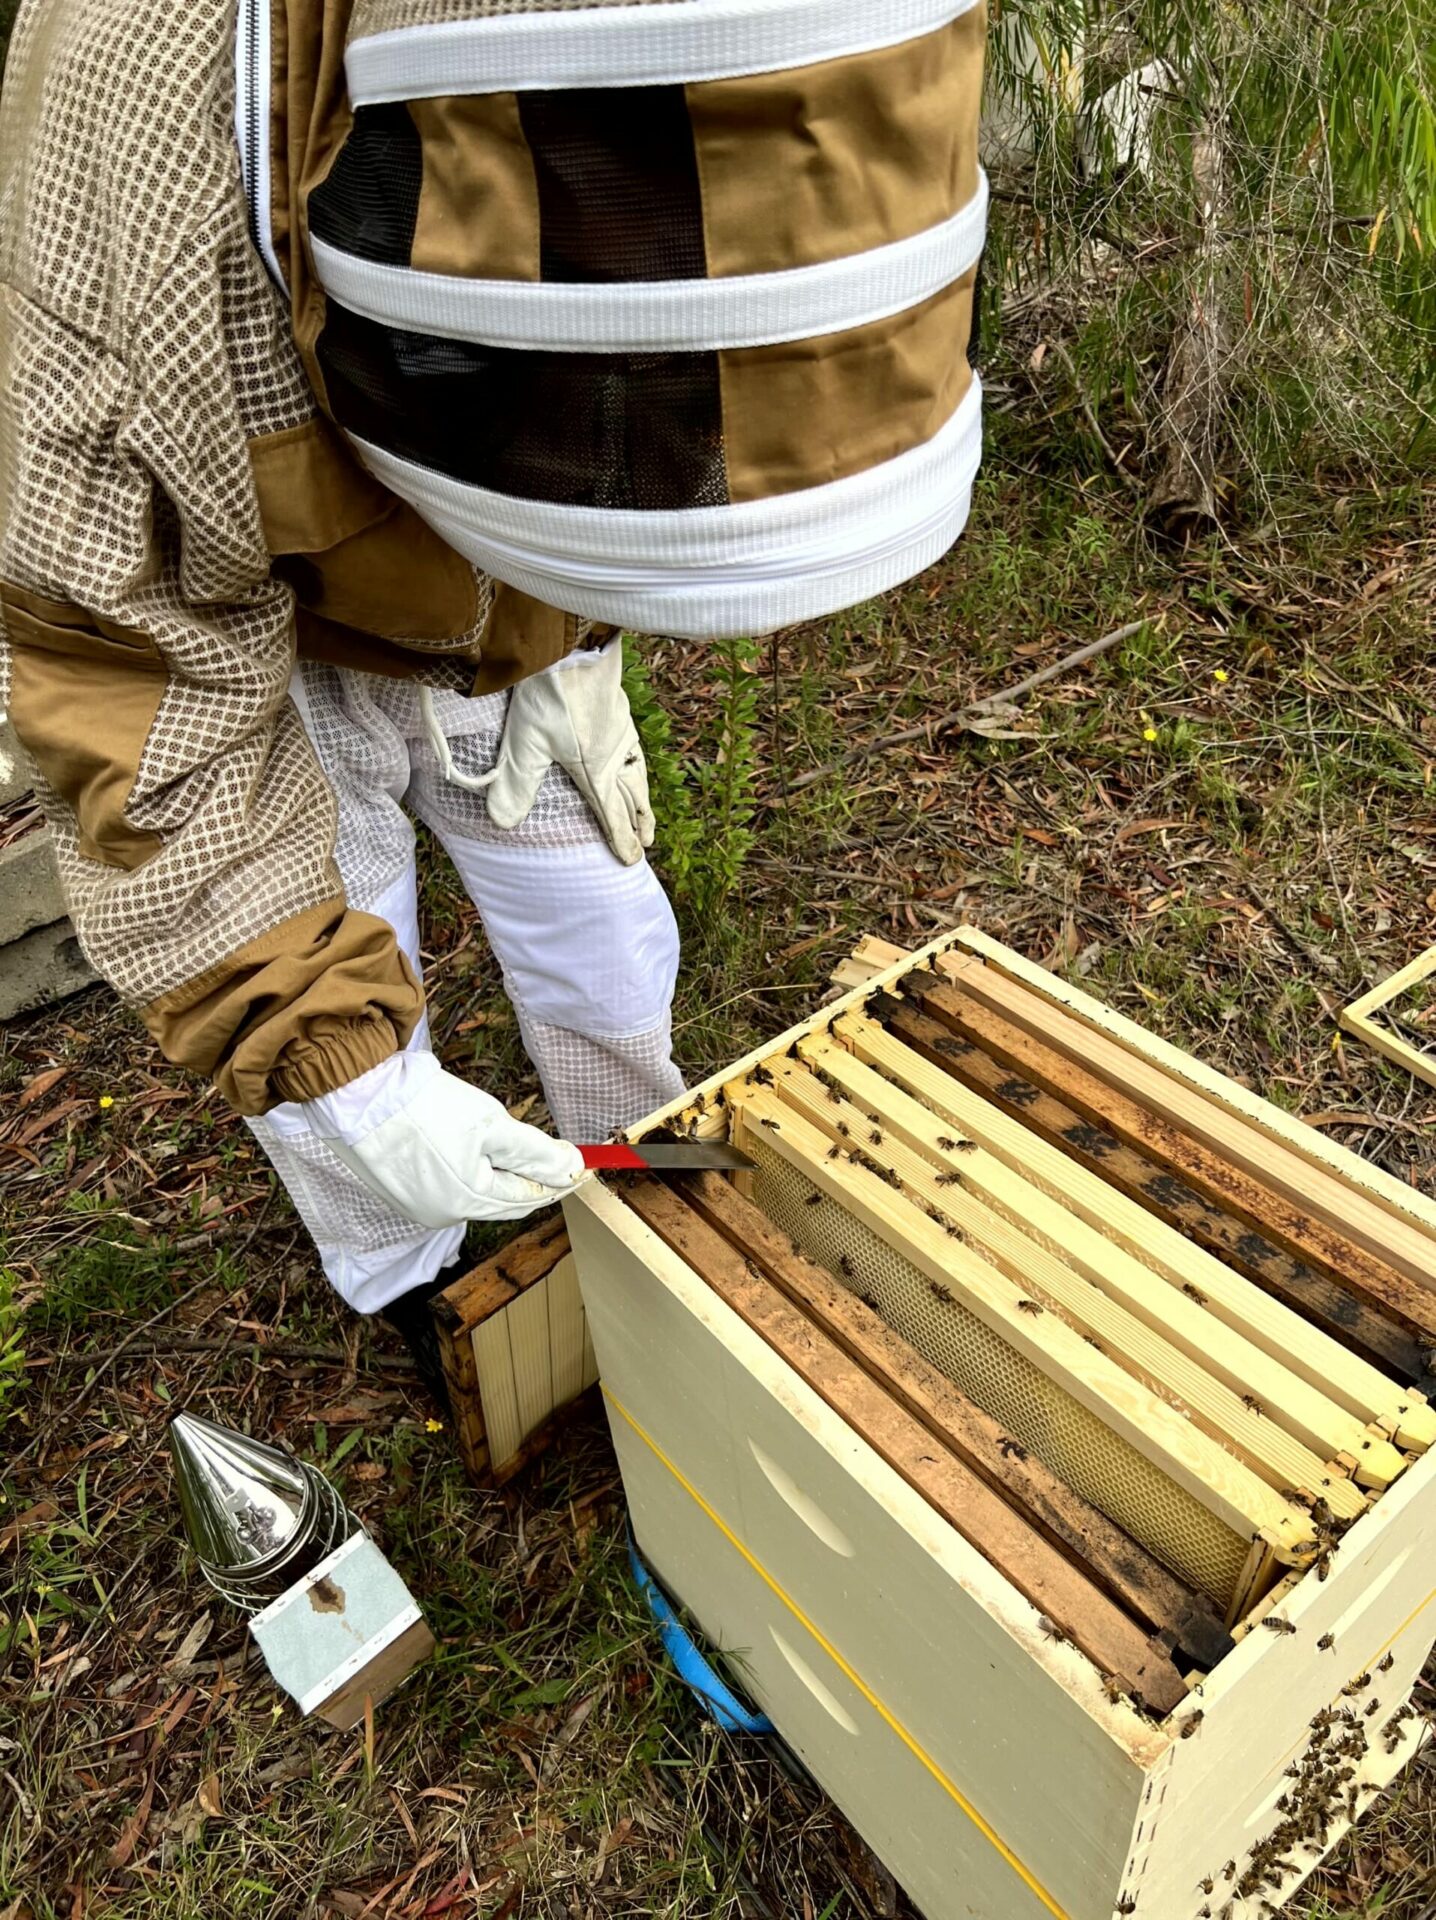 Sydney apiarist wearing protective clothing checking an Urban Beehive beehive